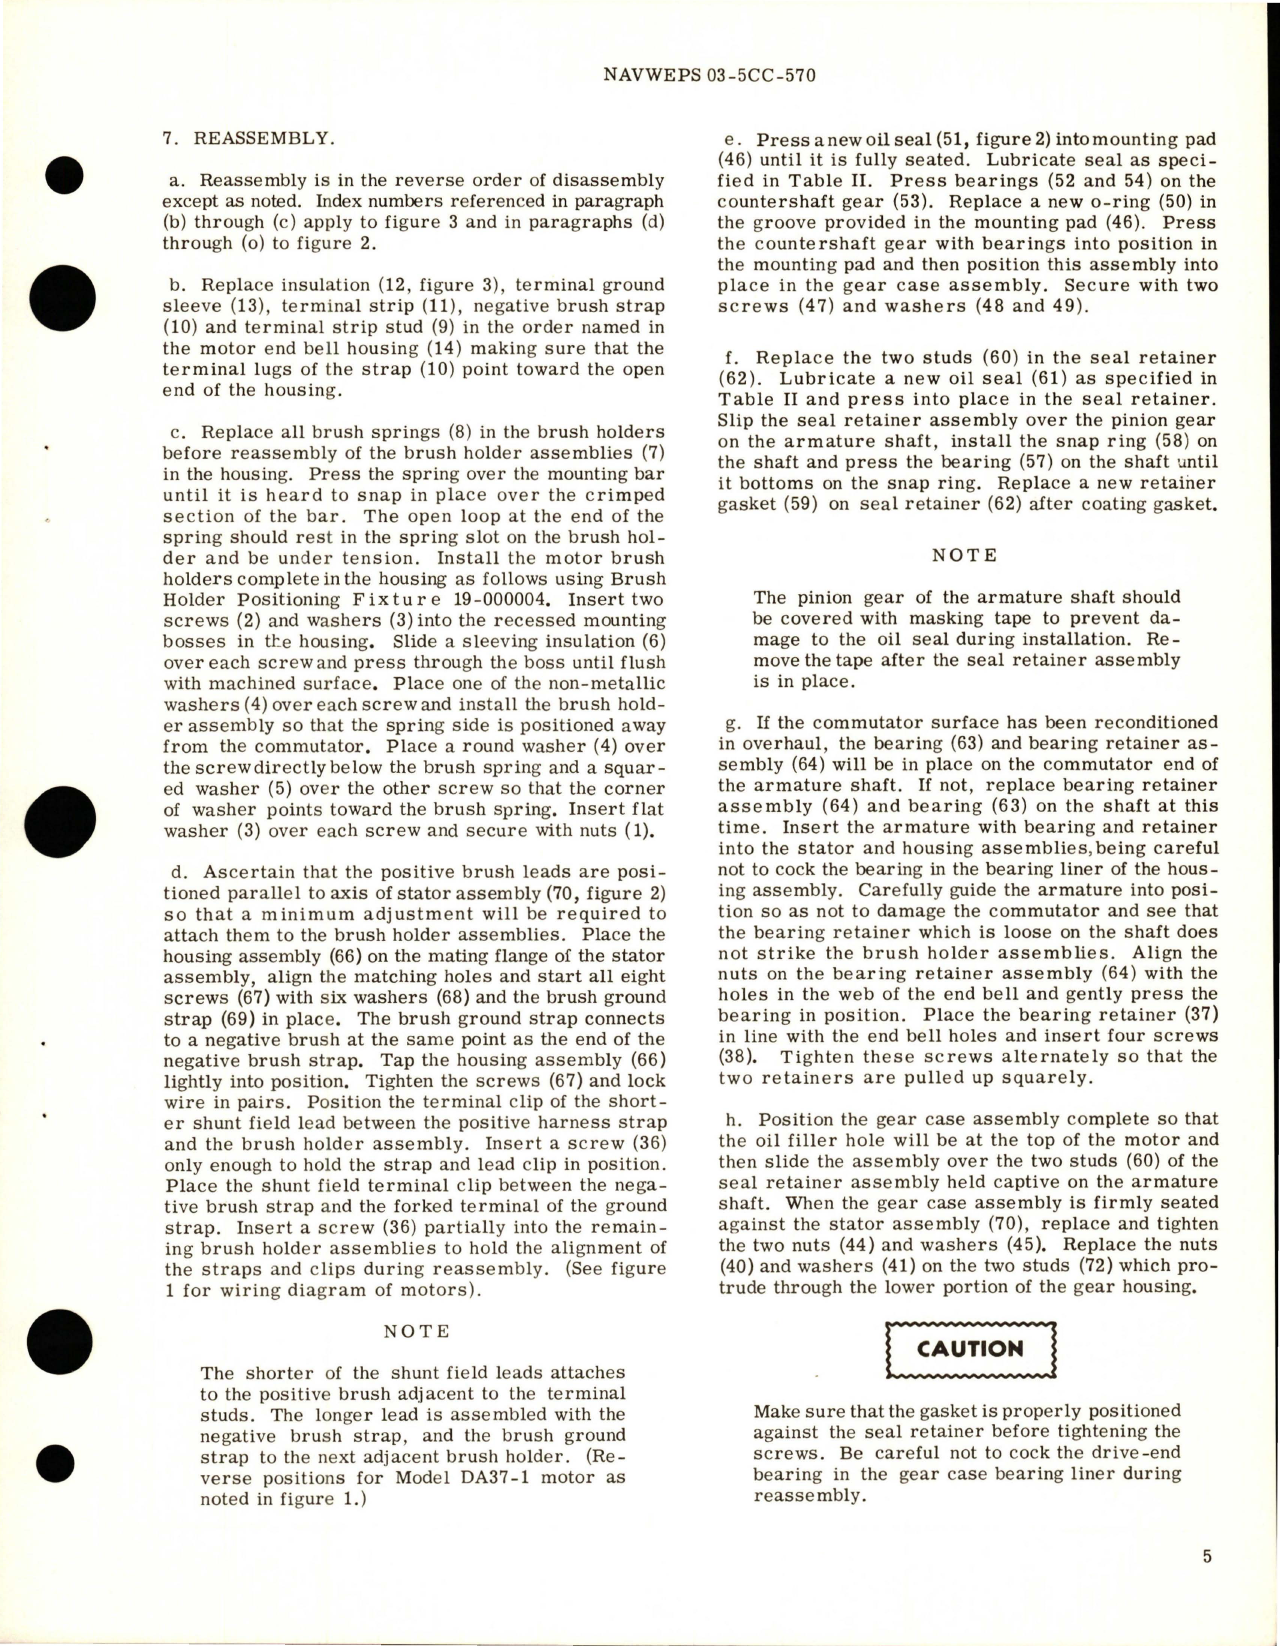 Sample page 7 from AirCorps Library document: Overhaul Instructions with Parts Breakdown for Motor - Models DA37 and DA37-1